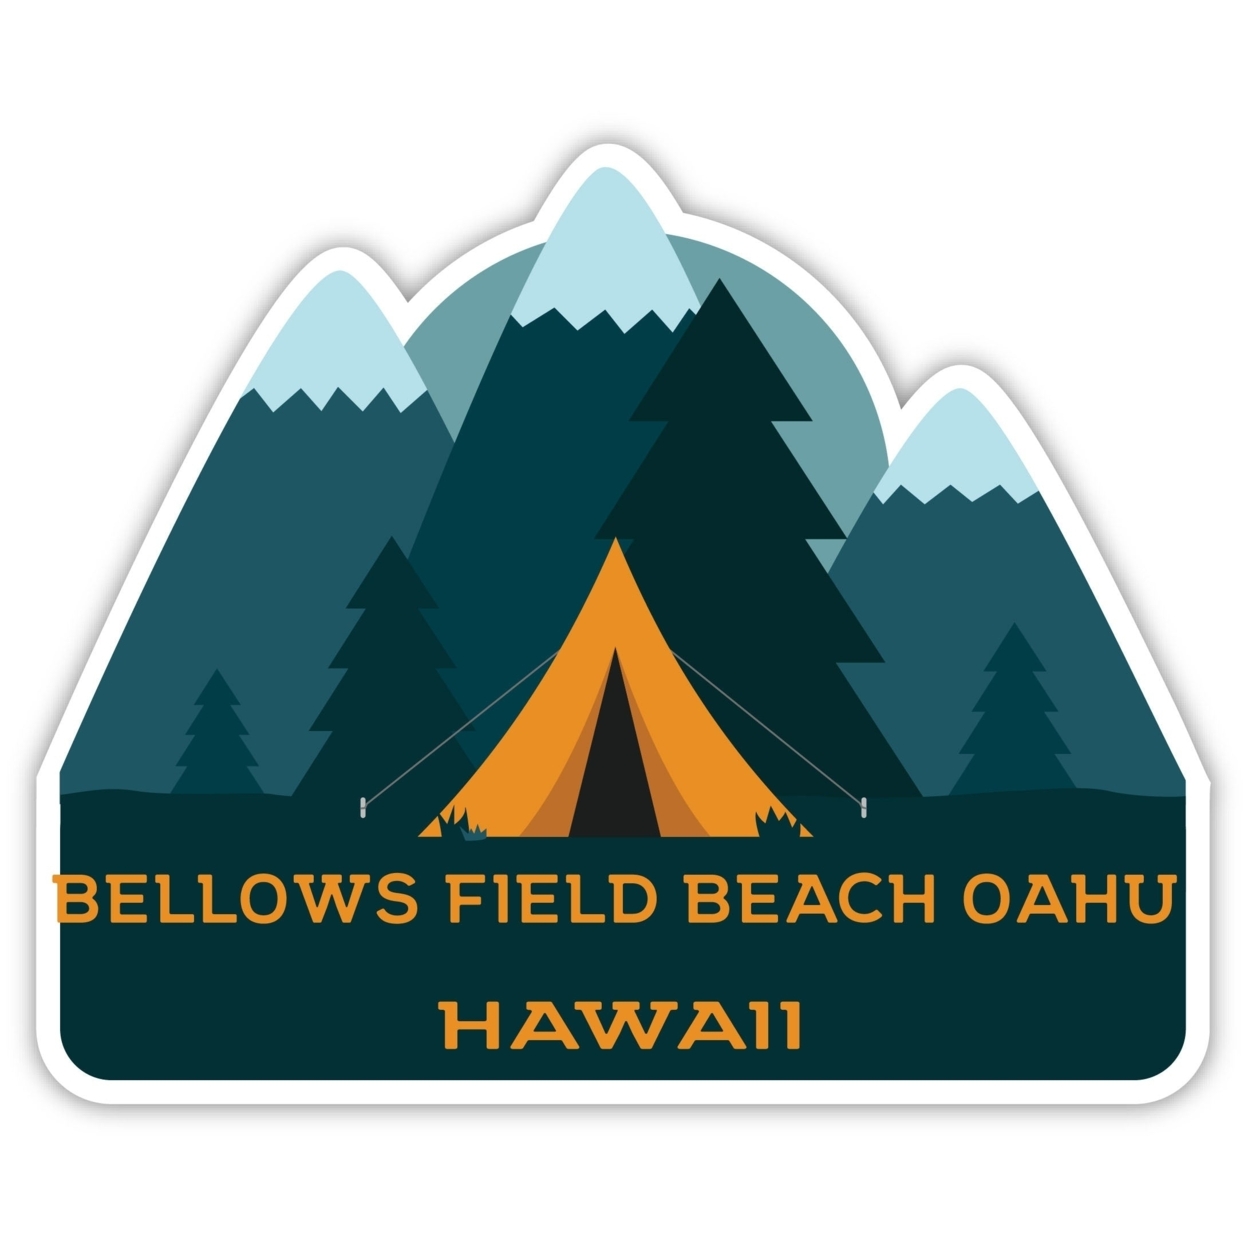 Bellows Field Beach Oahu Hawaii Souvenir Decorative Stickers (Choose Theme And Size) - 4-Pack, 2-Inch, Tent